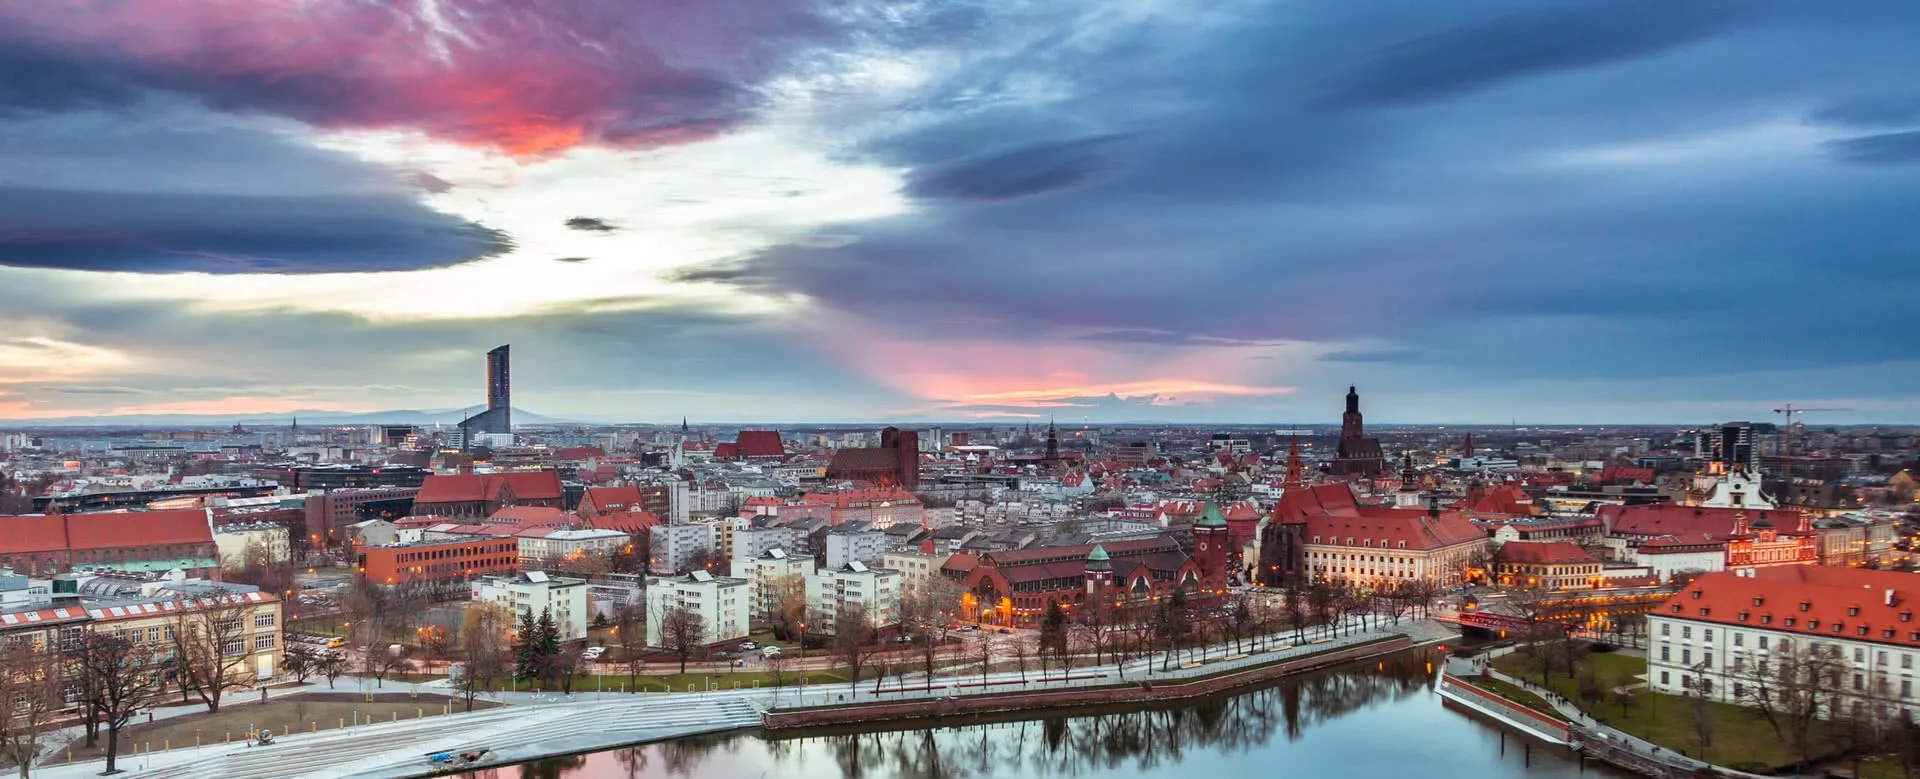 Wroclaw - the destination for group trips